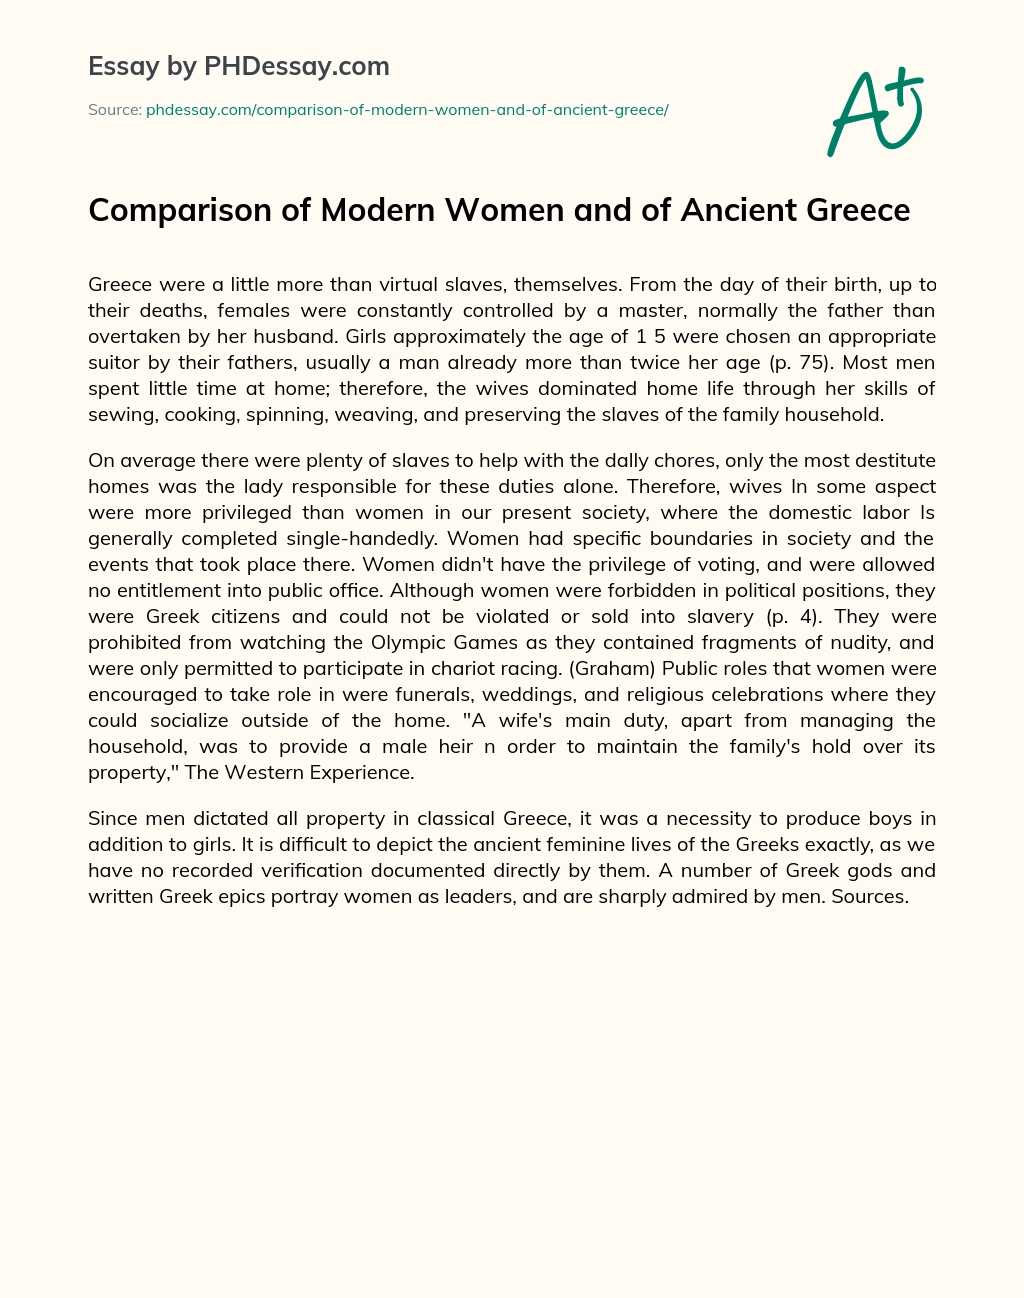 Comparison of Modern Women and of Ancient Greece essay